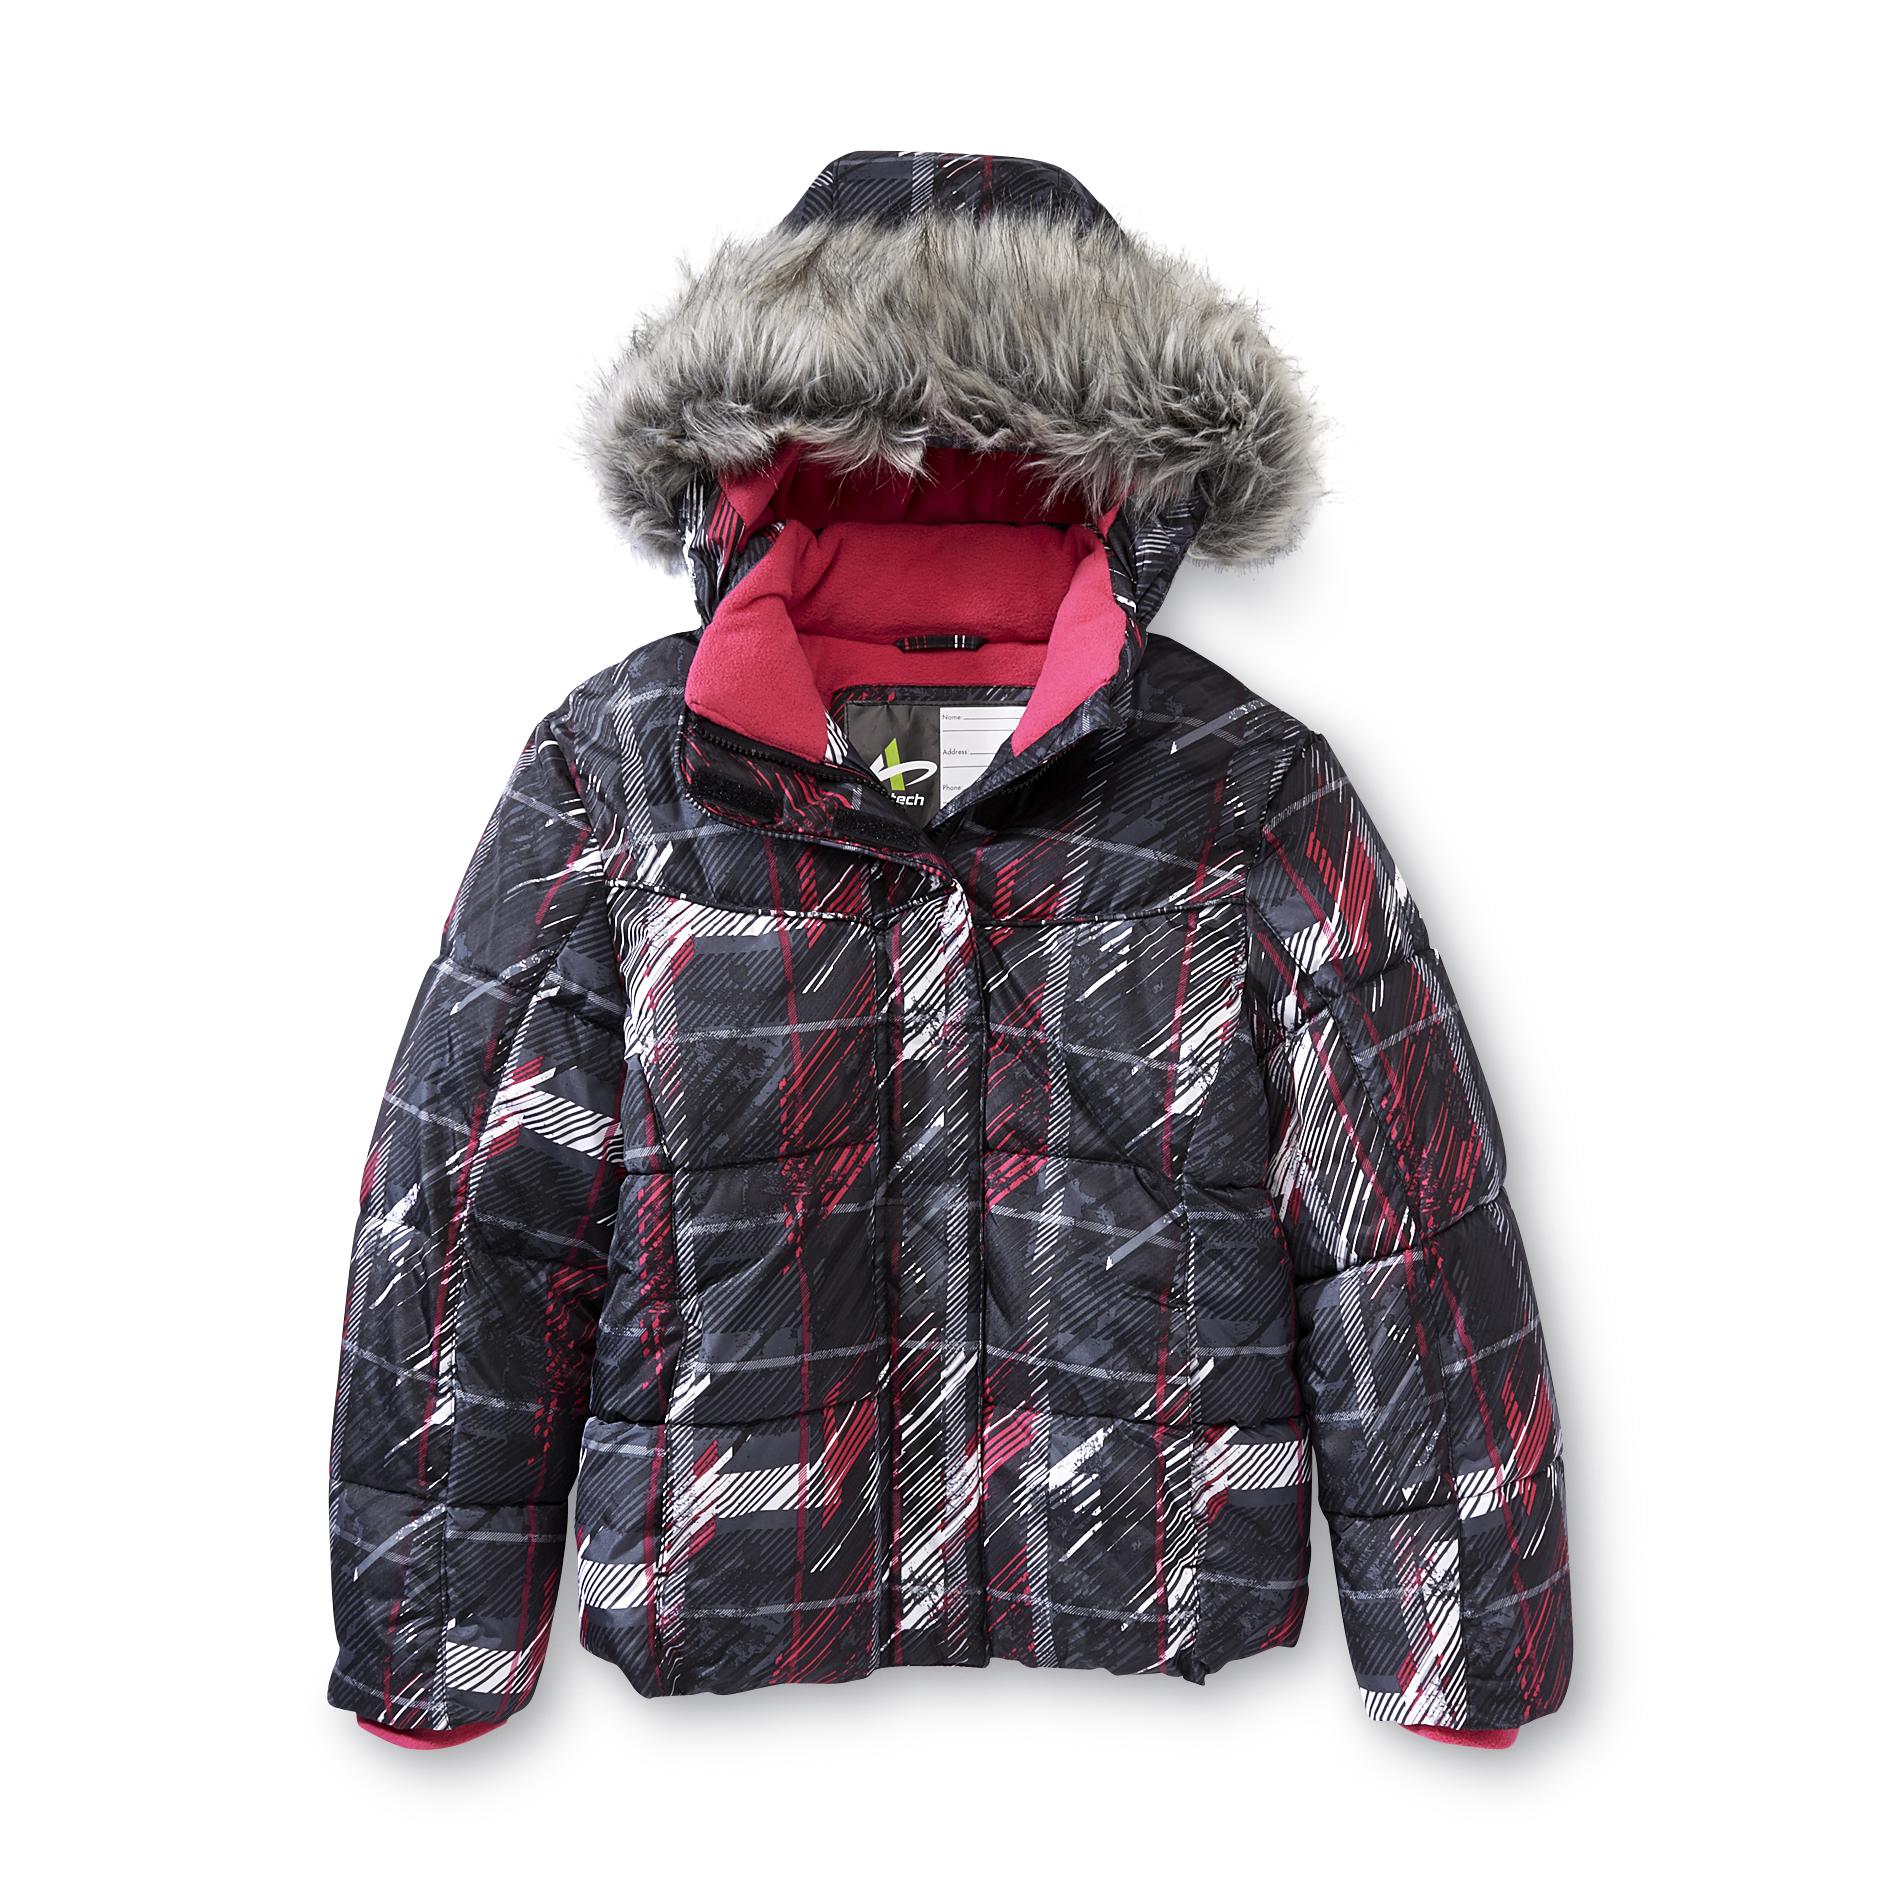 Athletech Girl's Hooded Puffer Jacket - Abstract Plaid